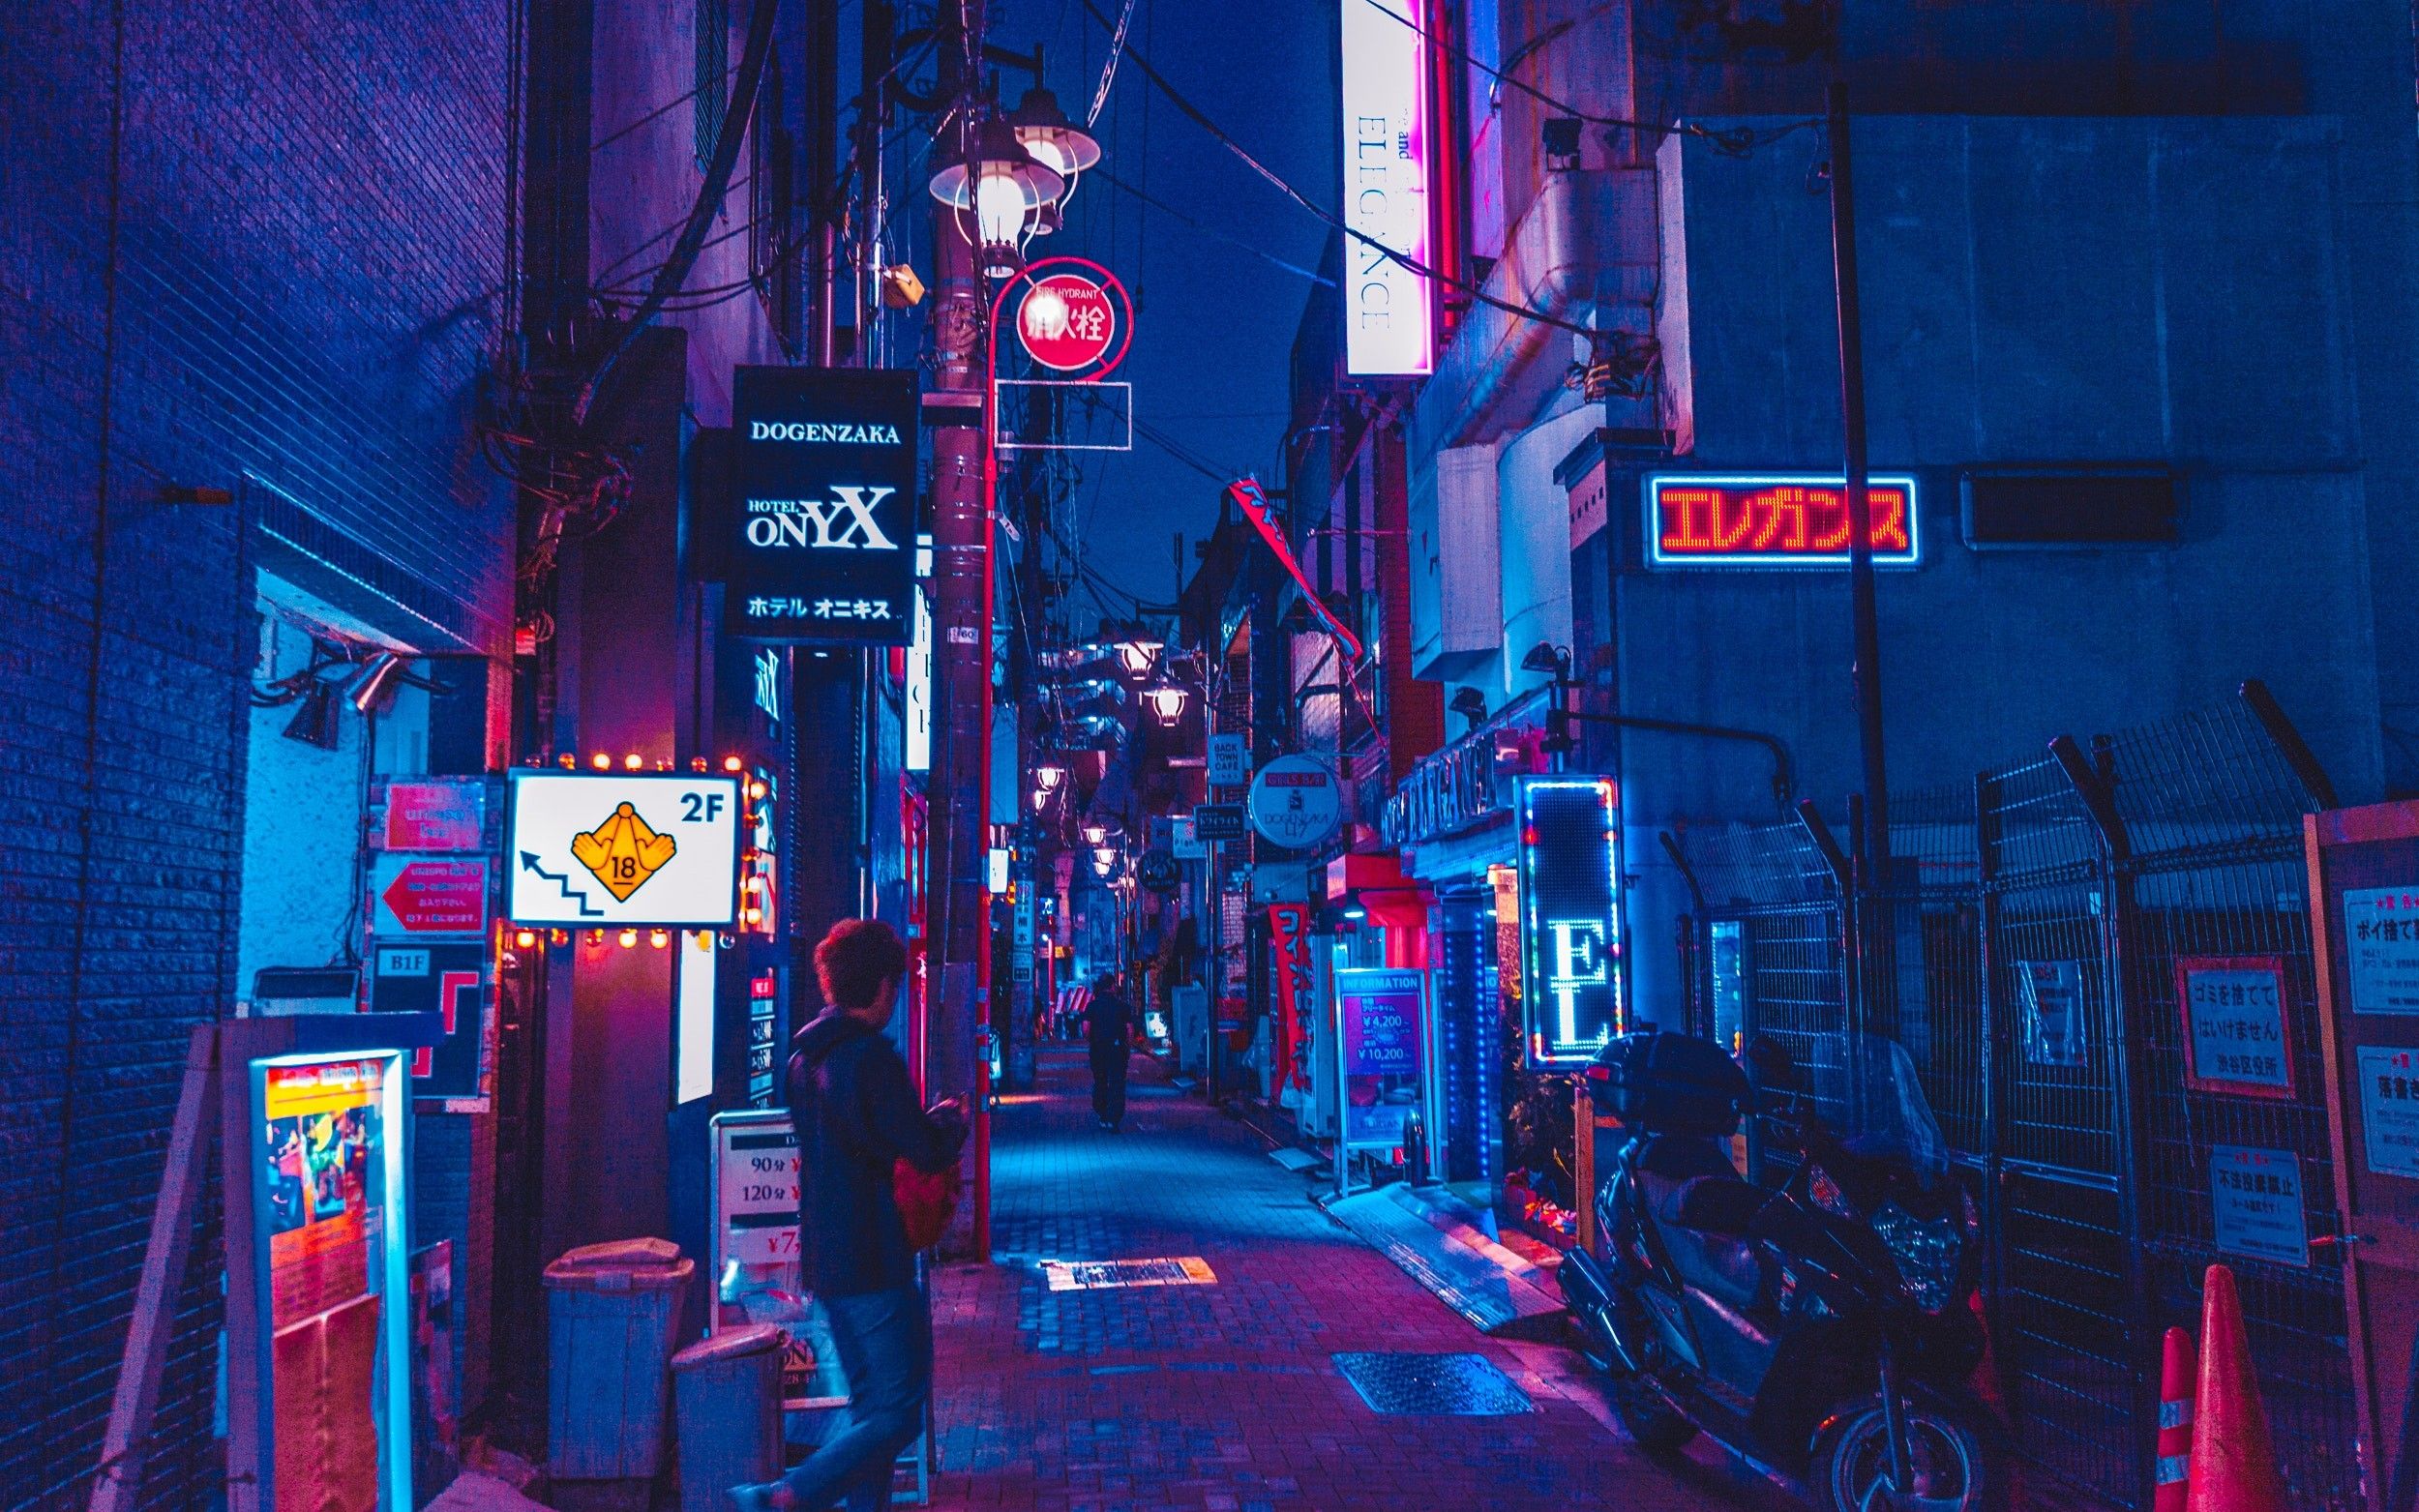 Blue Japanese Aesthetic Wallpapers